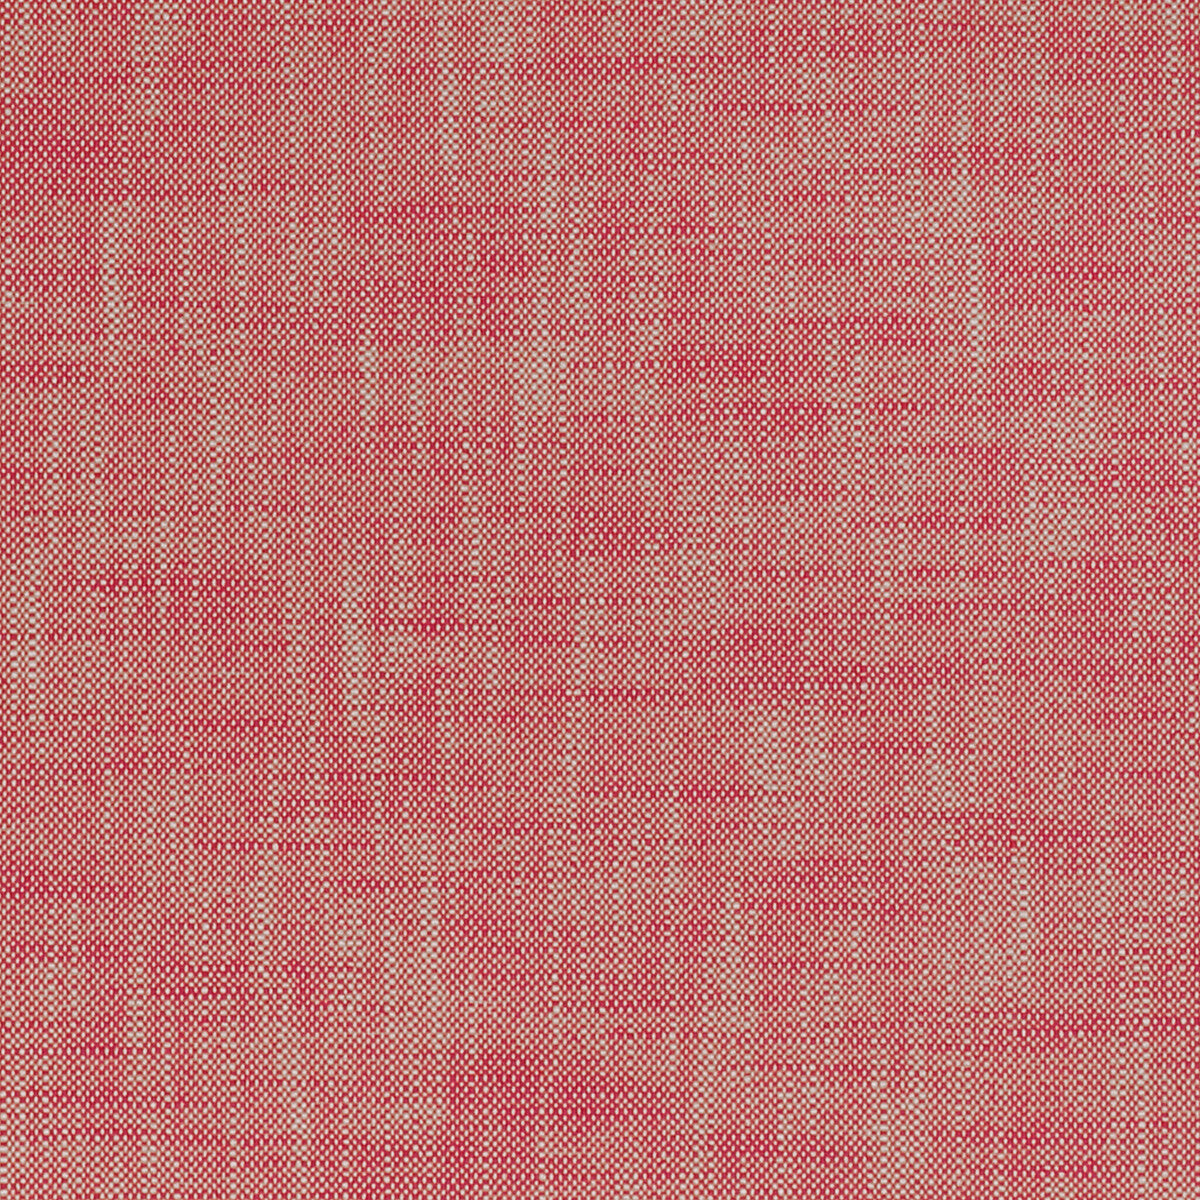 Kravet Smart fabric in 35517-19 color - pattern 35517.19.0 - by Kravet Smart in the Inside Out Performance Fabrics collection